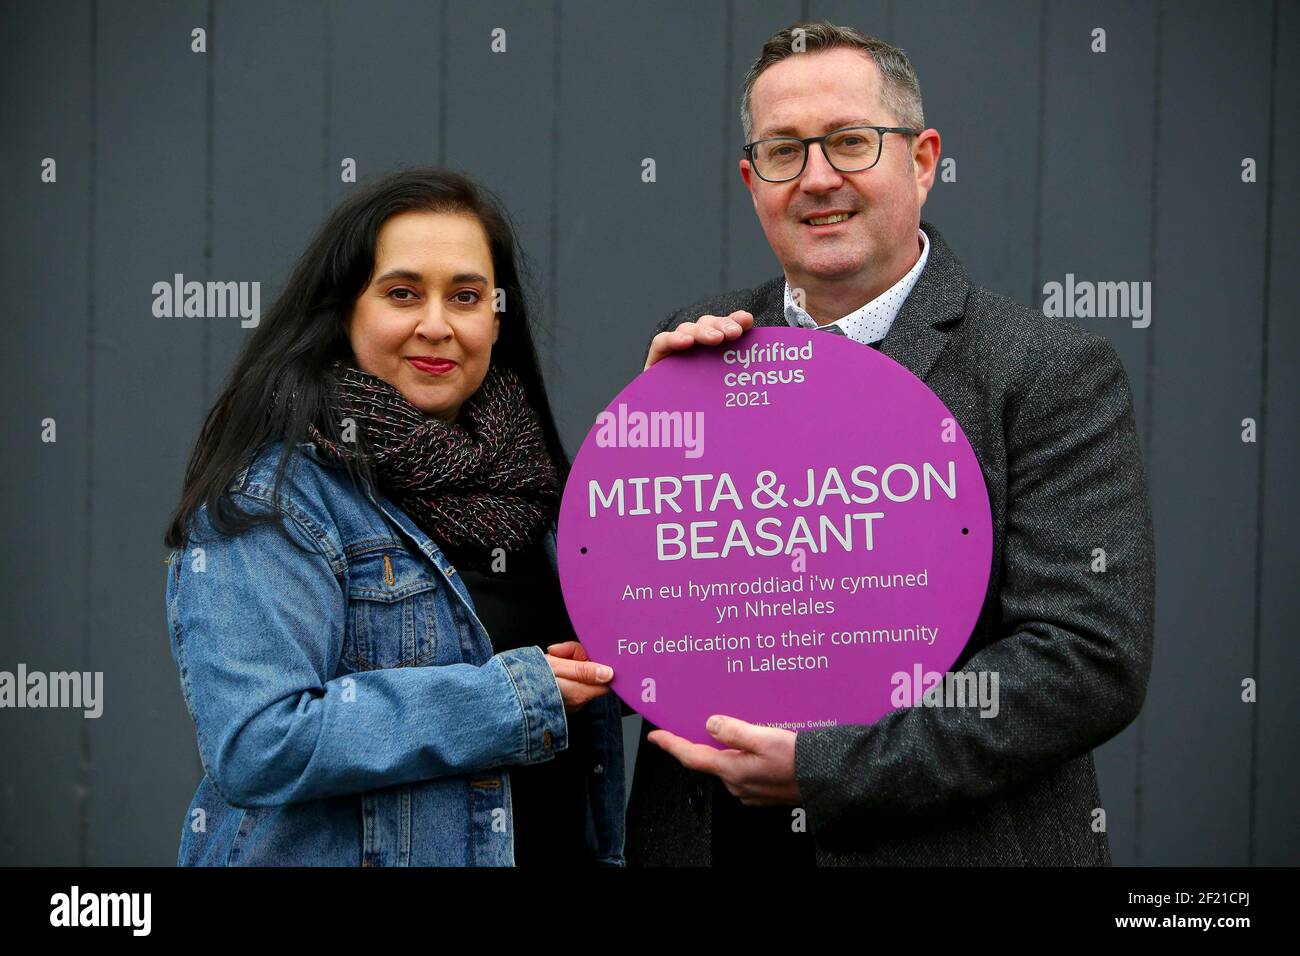 EDITORIAL USE ONLY Mirta and Jason Beasant receive a Census Community Hero purple plaque from the Office for National Statistics for dedication to their community in Laleston, Wales ahead of Census 2021, which is on March 21. Stock Photo